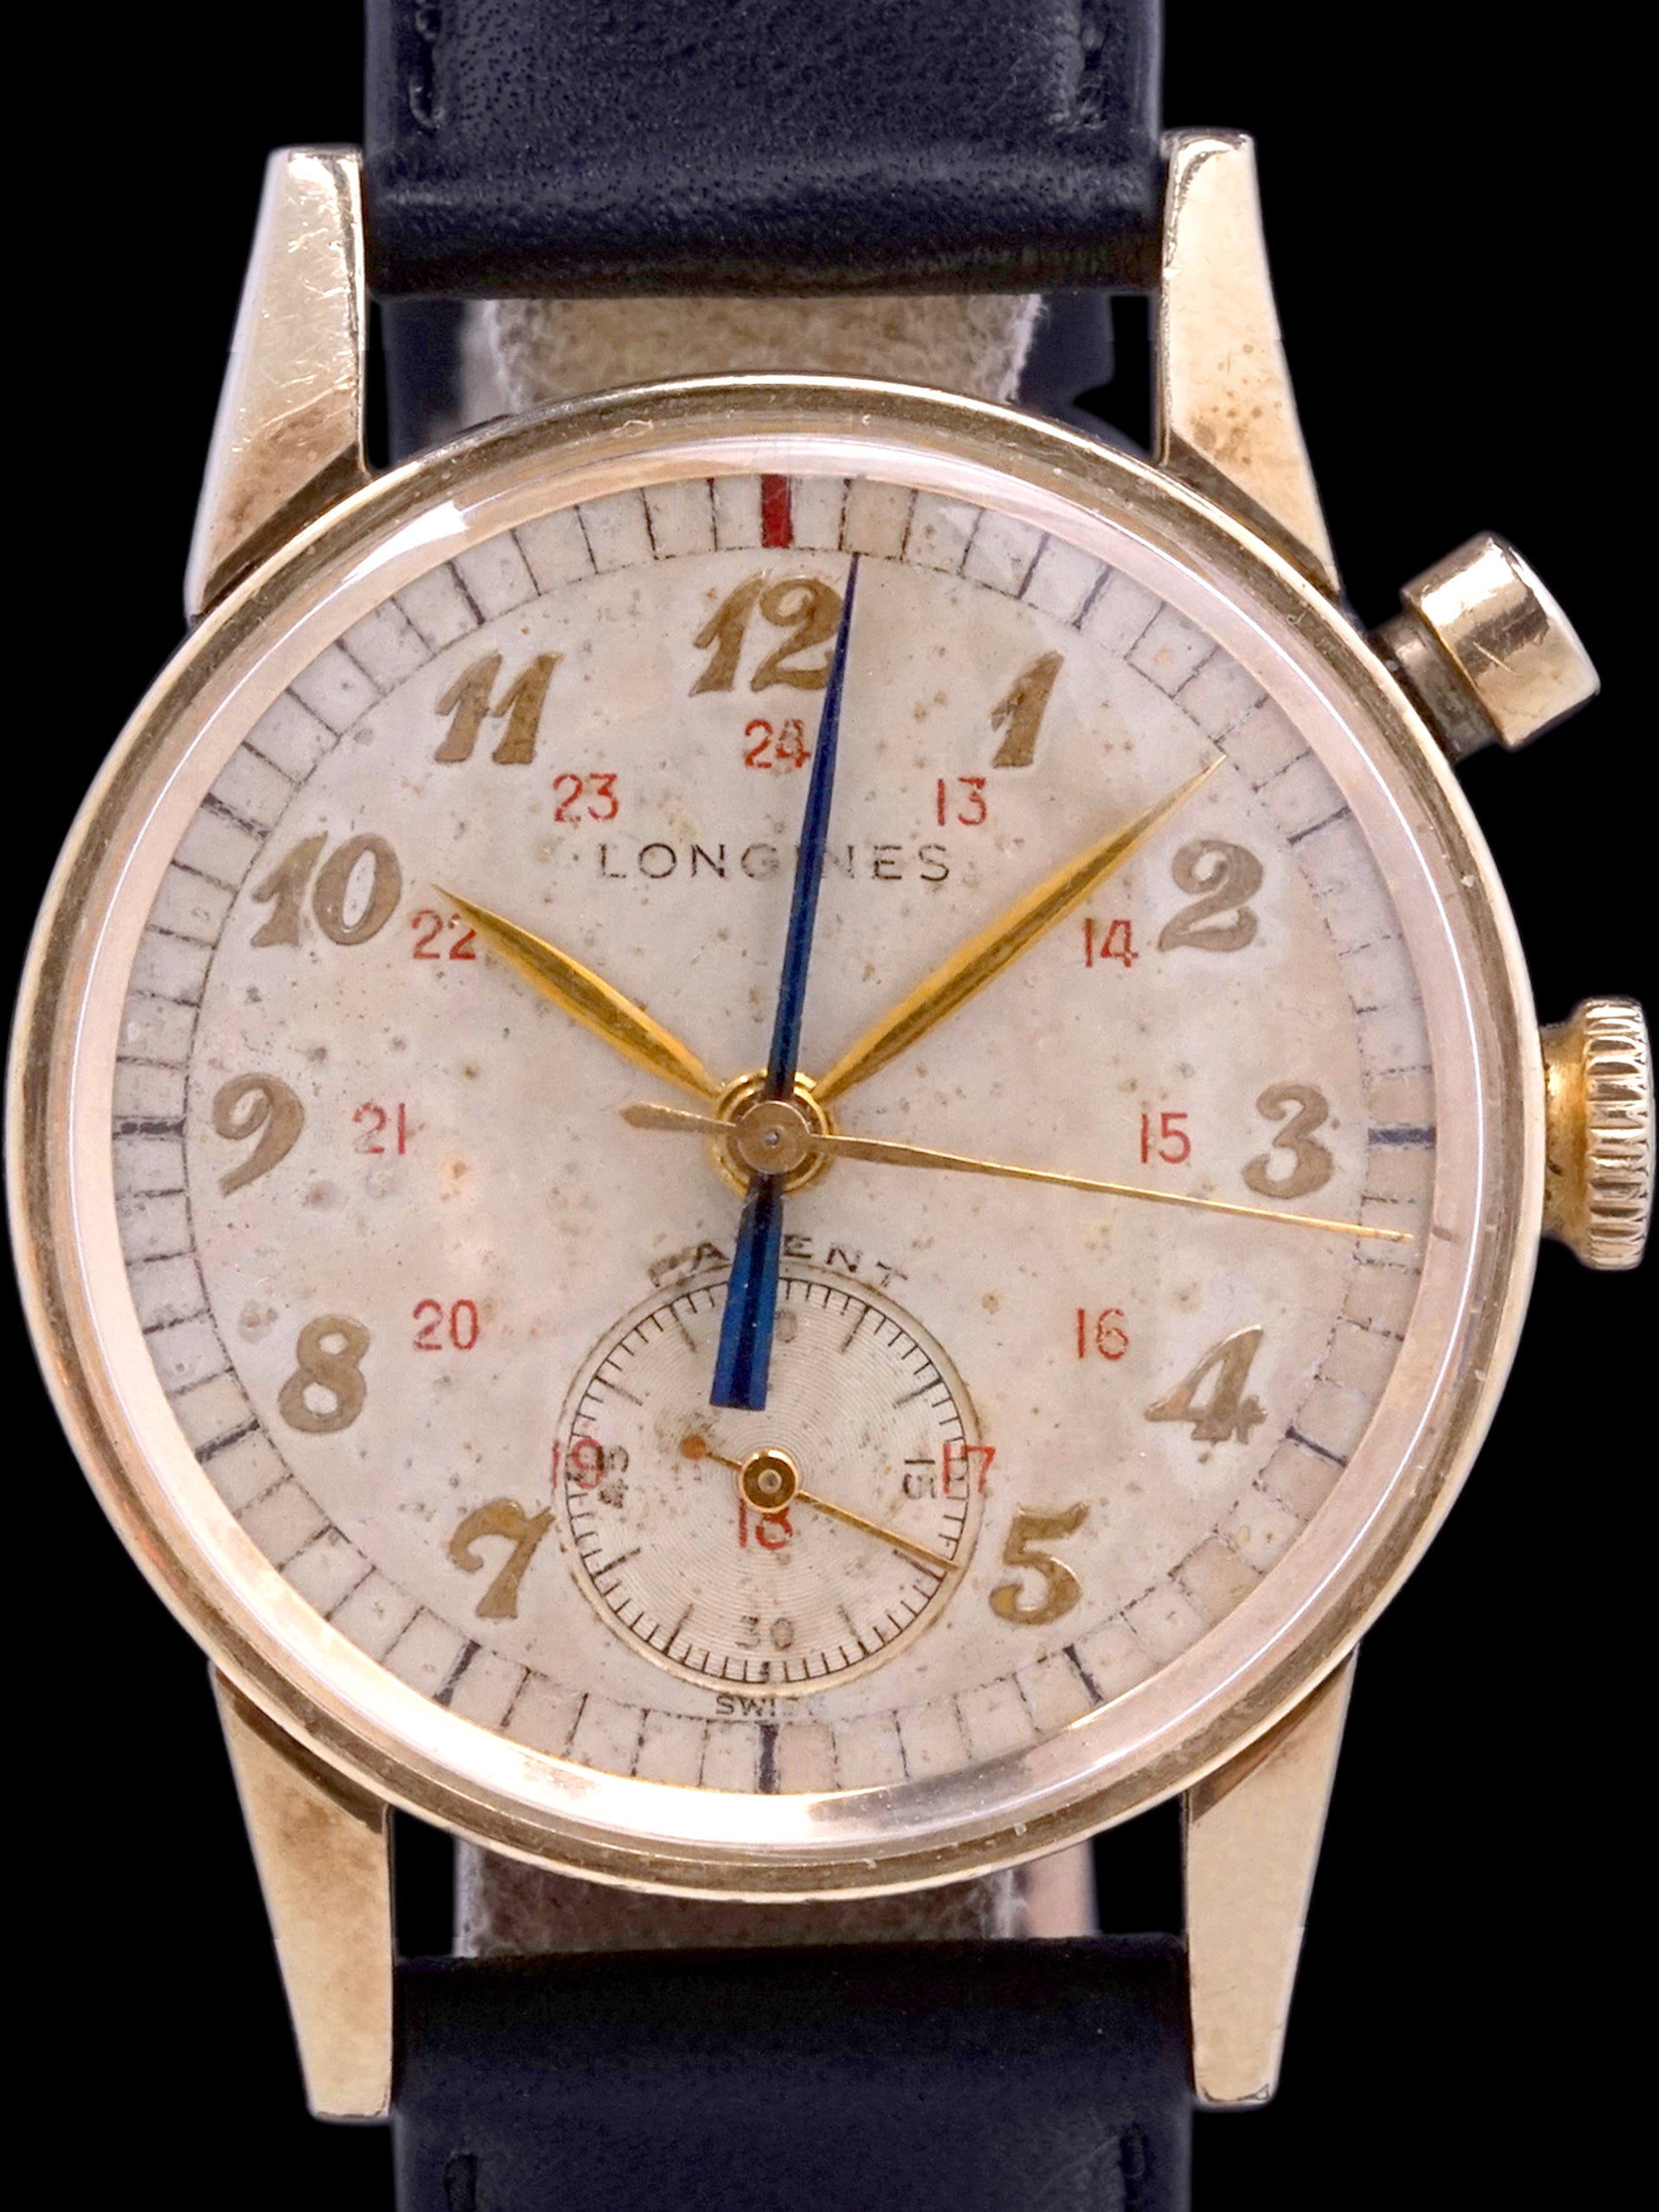 1953 Longines Mono-Pusher Stop-Second Chronograph (Cal. 12.68Z) 10k Gold Filled - Previously Owned By Joe Paparella